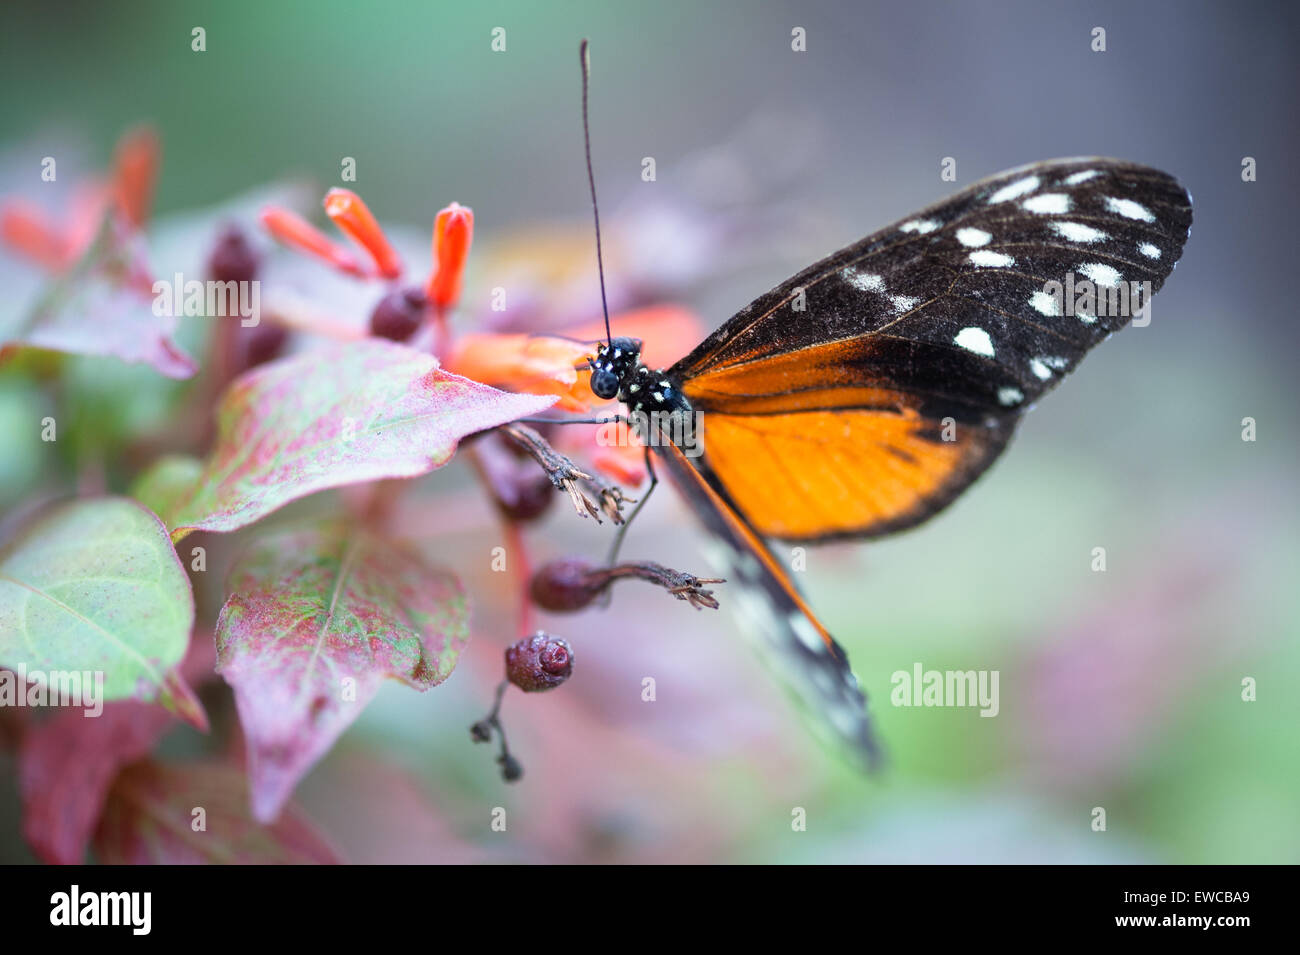 Macrophotography of a butterfly on leaves Stock Photo